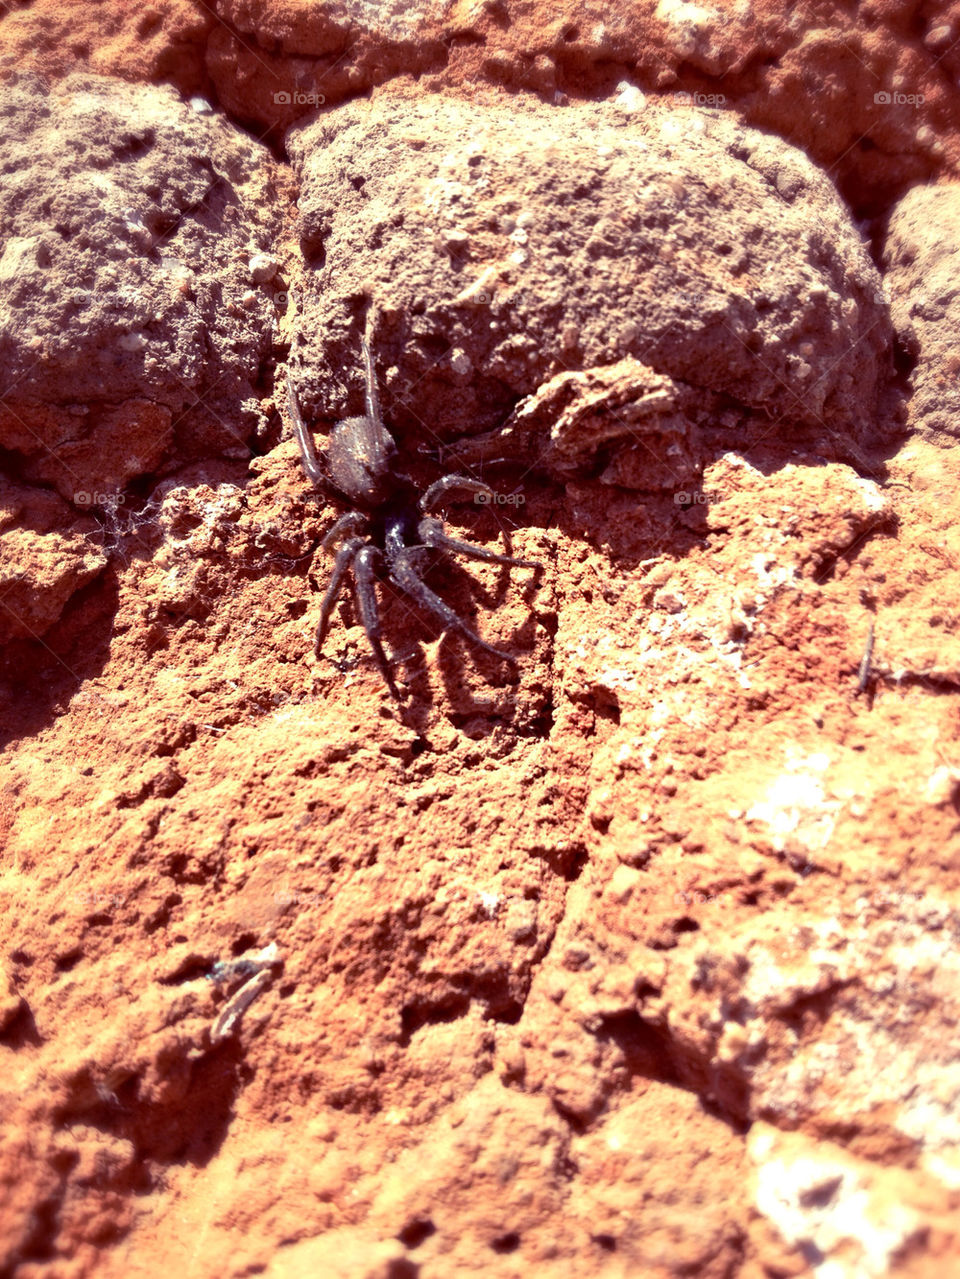 spider on the rock